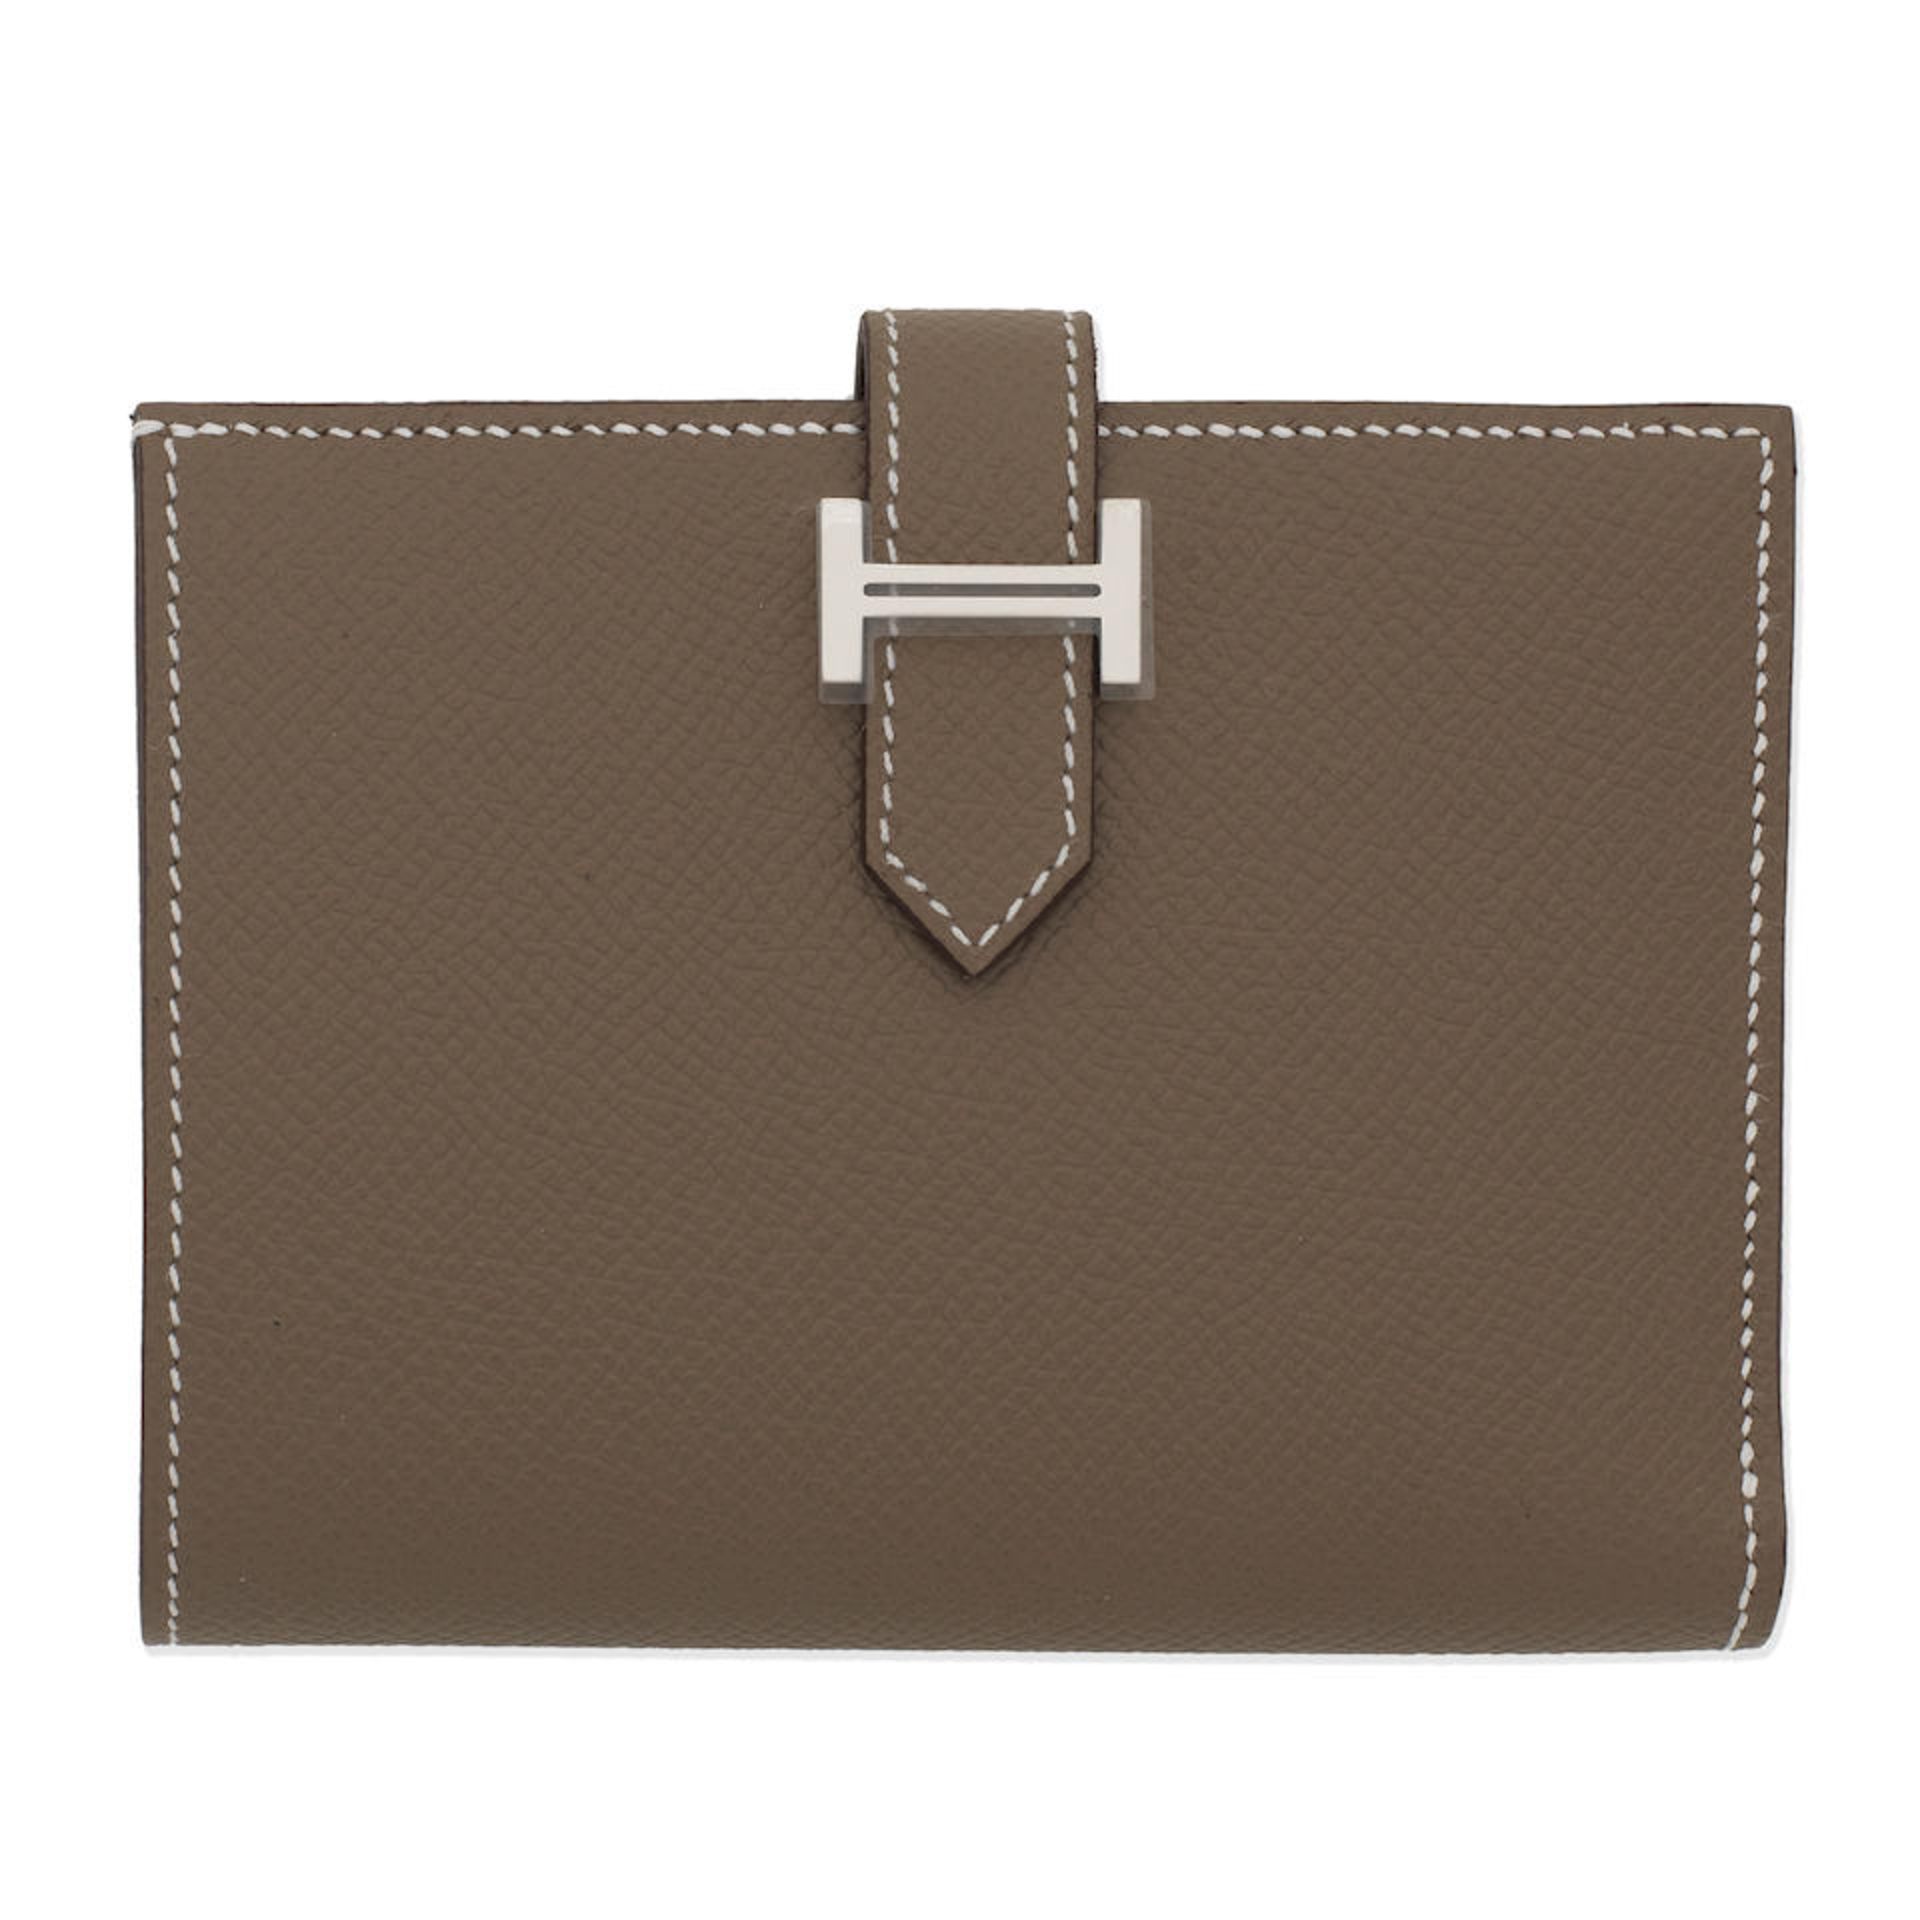 Hermès: an Etoupe Epsom Leather Bearn Compact Wallet 2023 (includes felt protector and box)